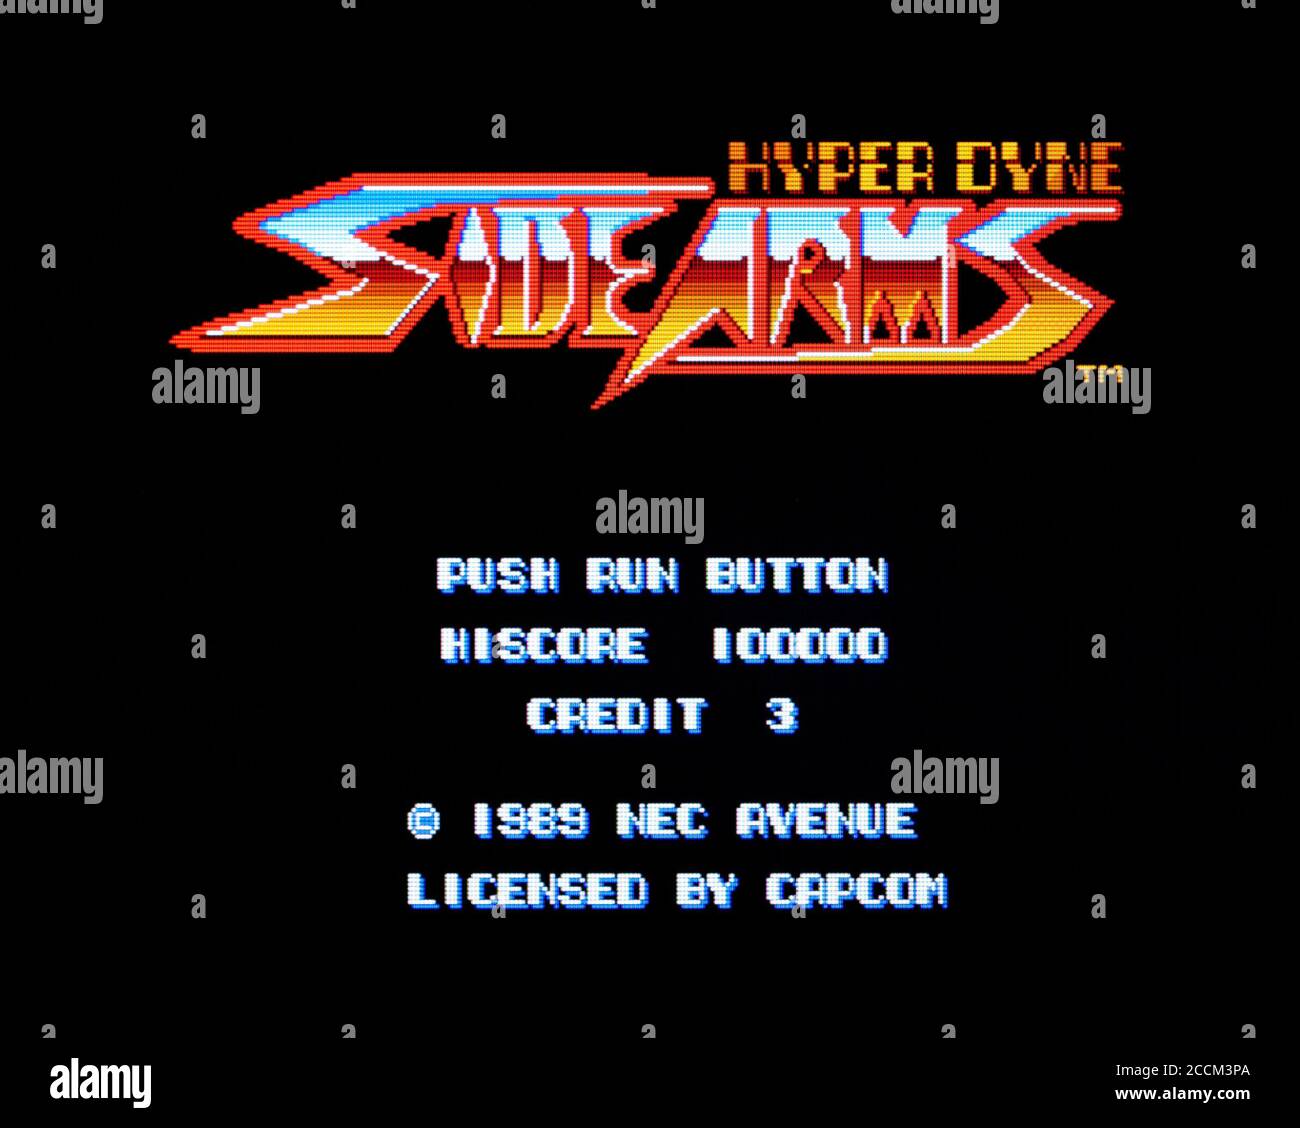 Sidearms - Hyper Dyne - PC Engine Videogame - Editorial use only Stock Photo